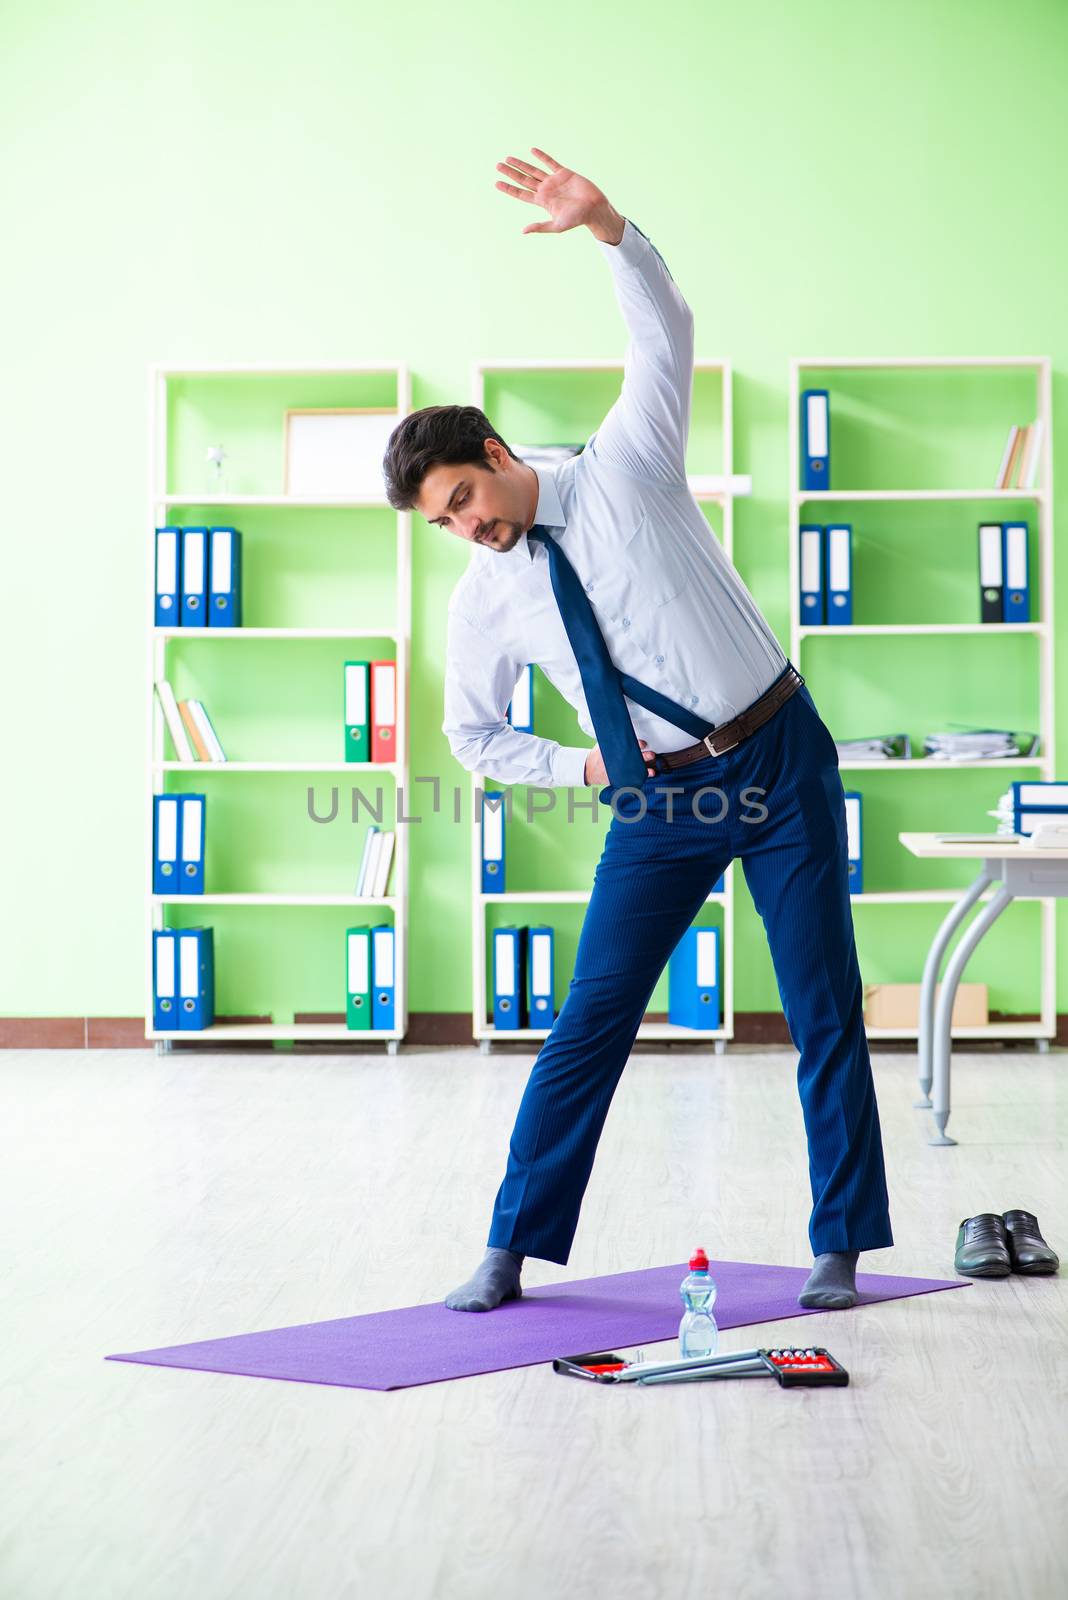 Employee doing exercises during break at work by Elnur